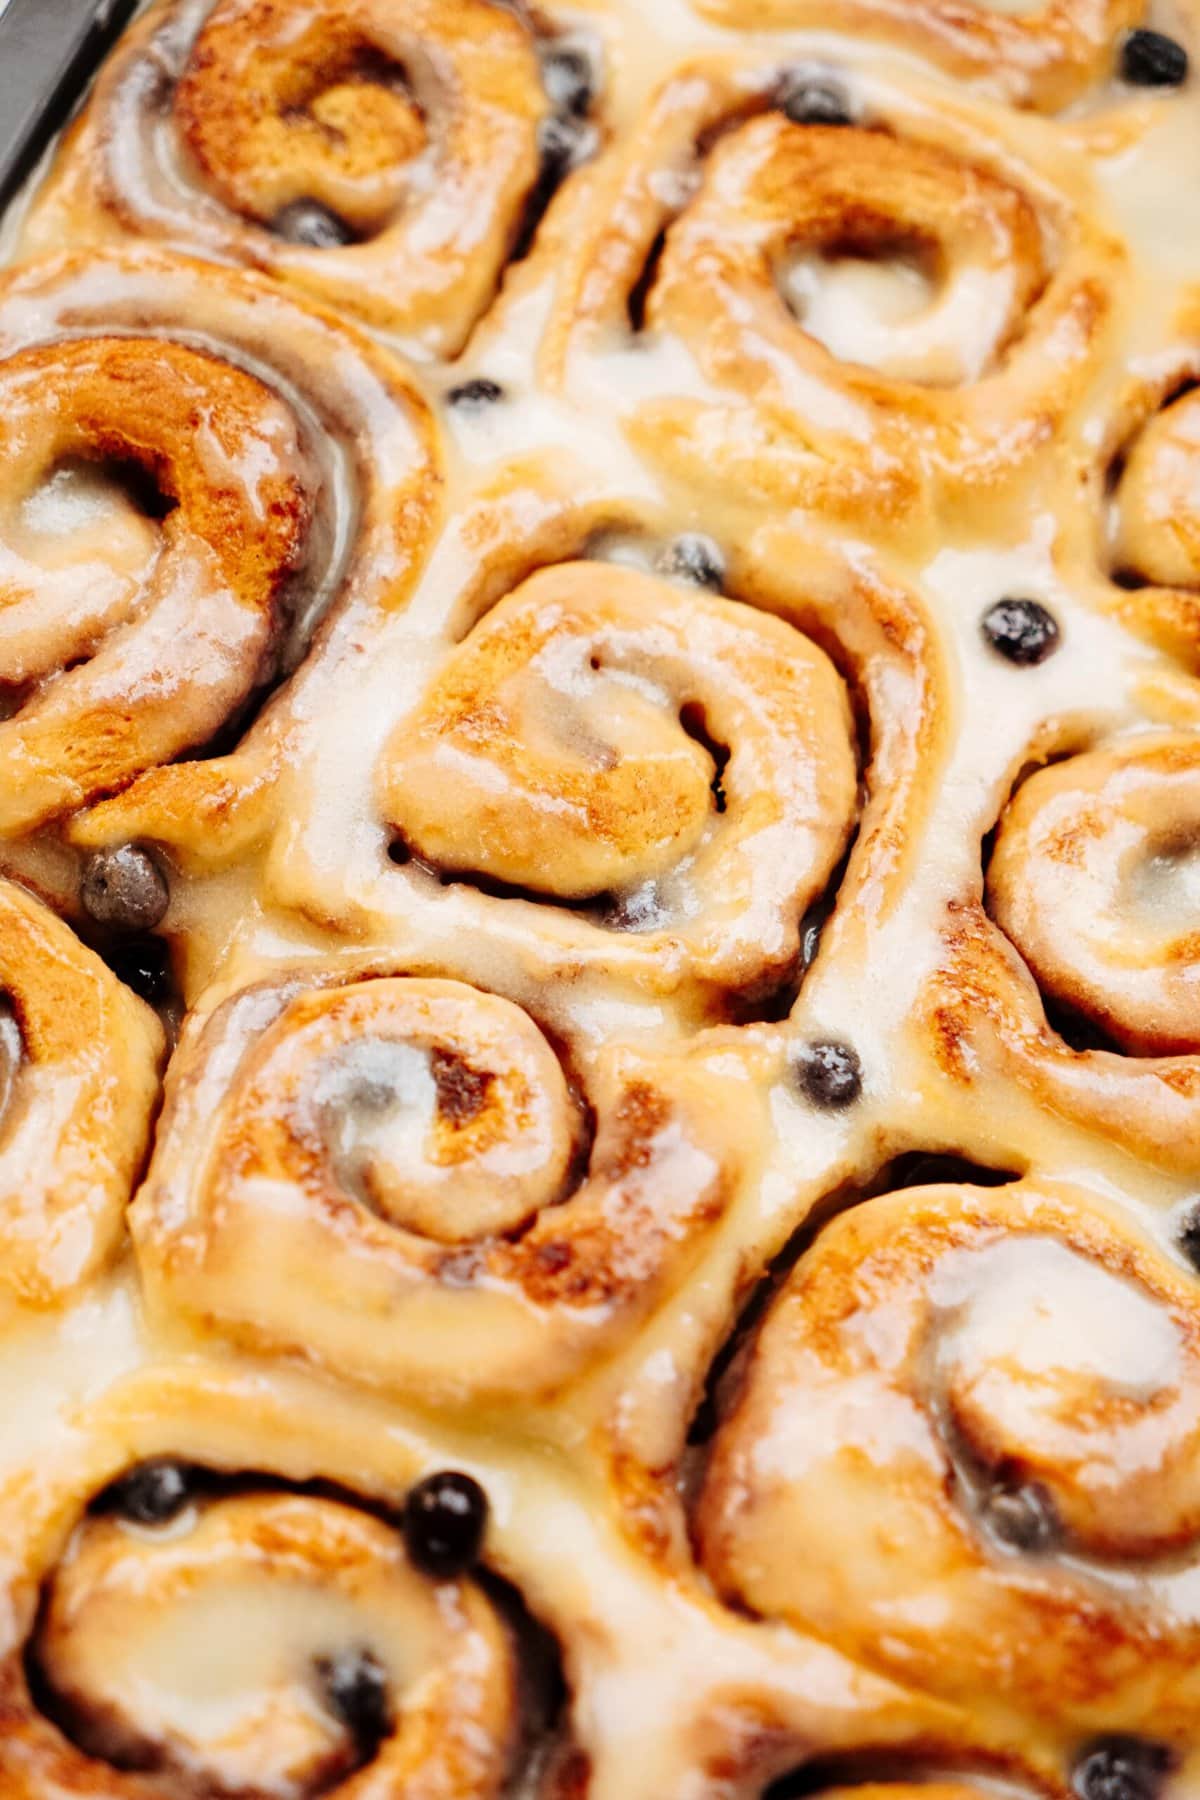 A close-up view of freshly baked cinnamon rolls with a glaze on top, featuring some visible raisins or blueberries in the soft dough.